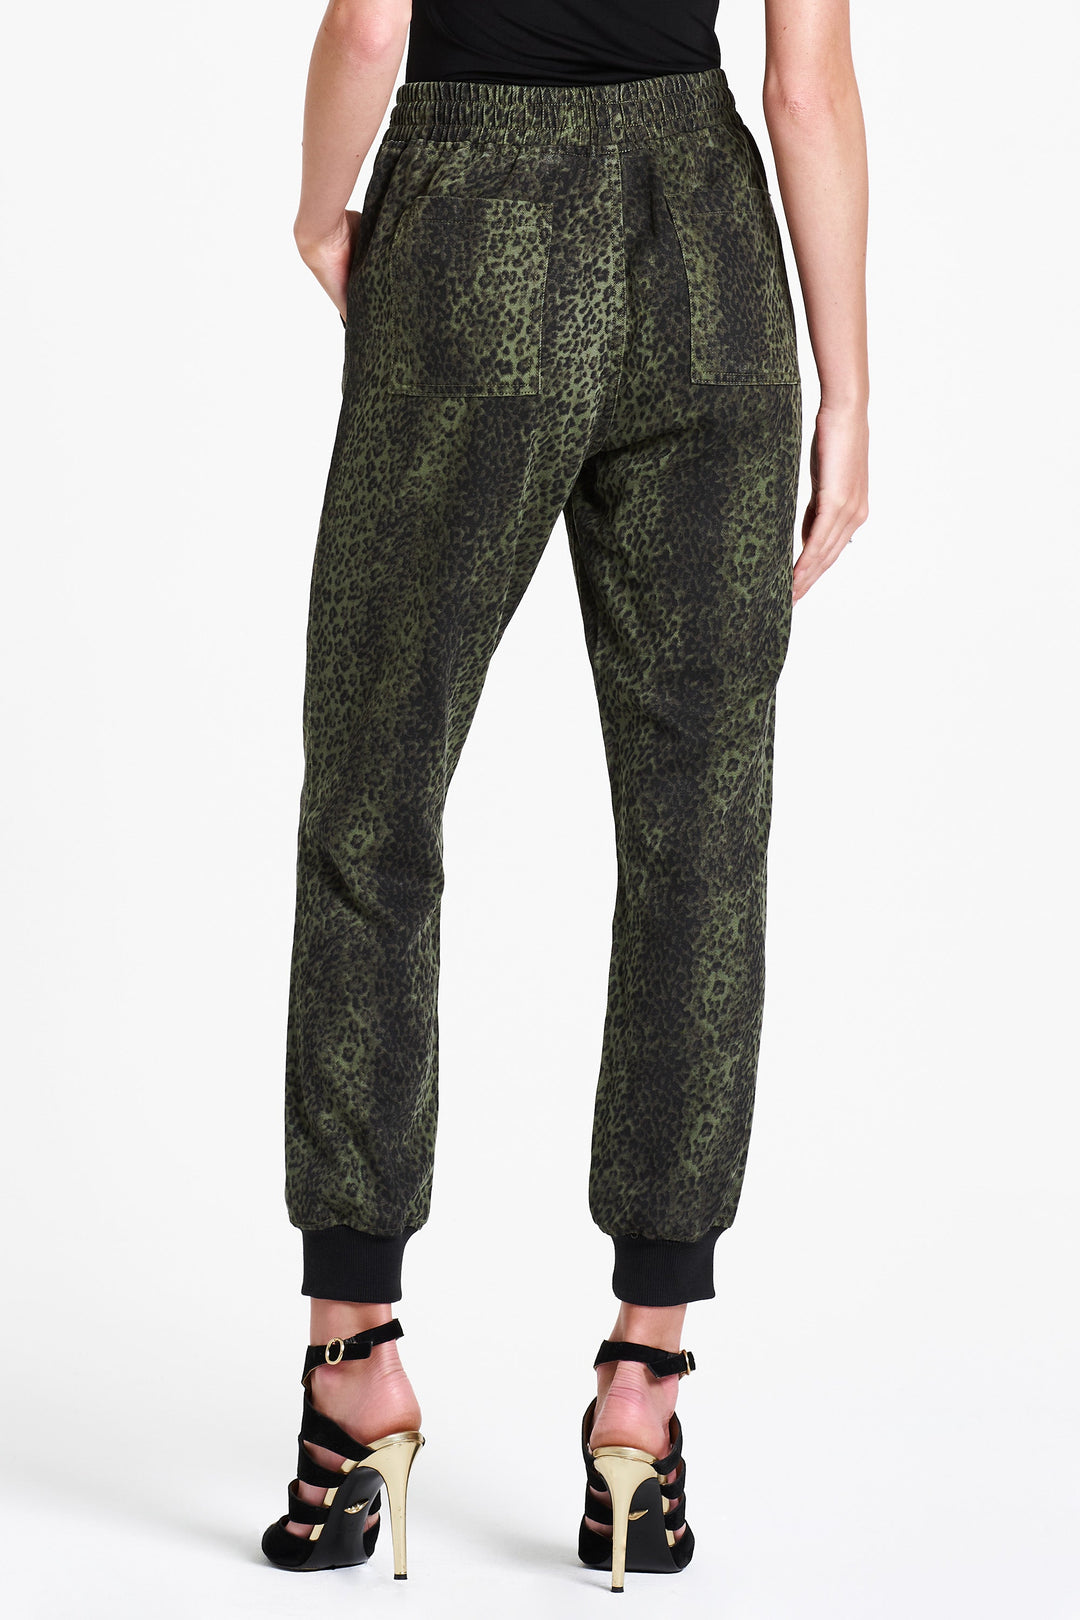 image of a female model wearing a JACEY SUPER HIGH RISE CROPPED JOGGER PANTS GREEN CHEETAH PANTS